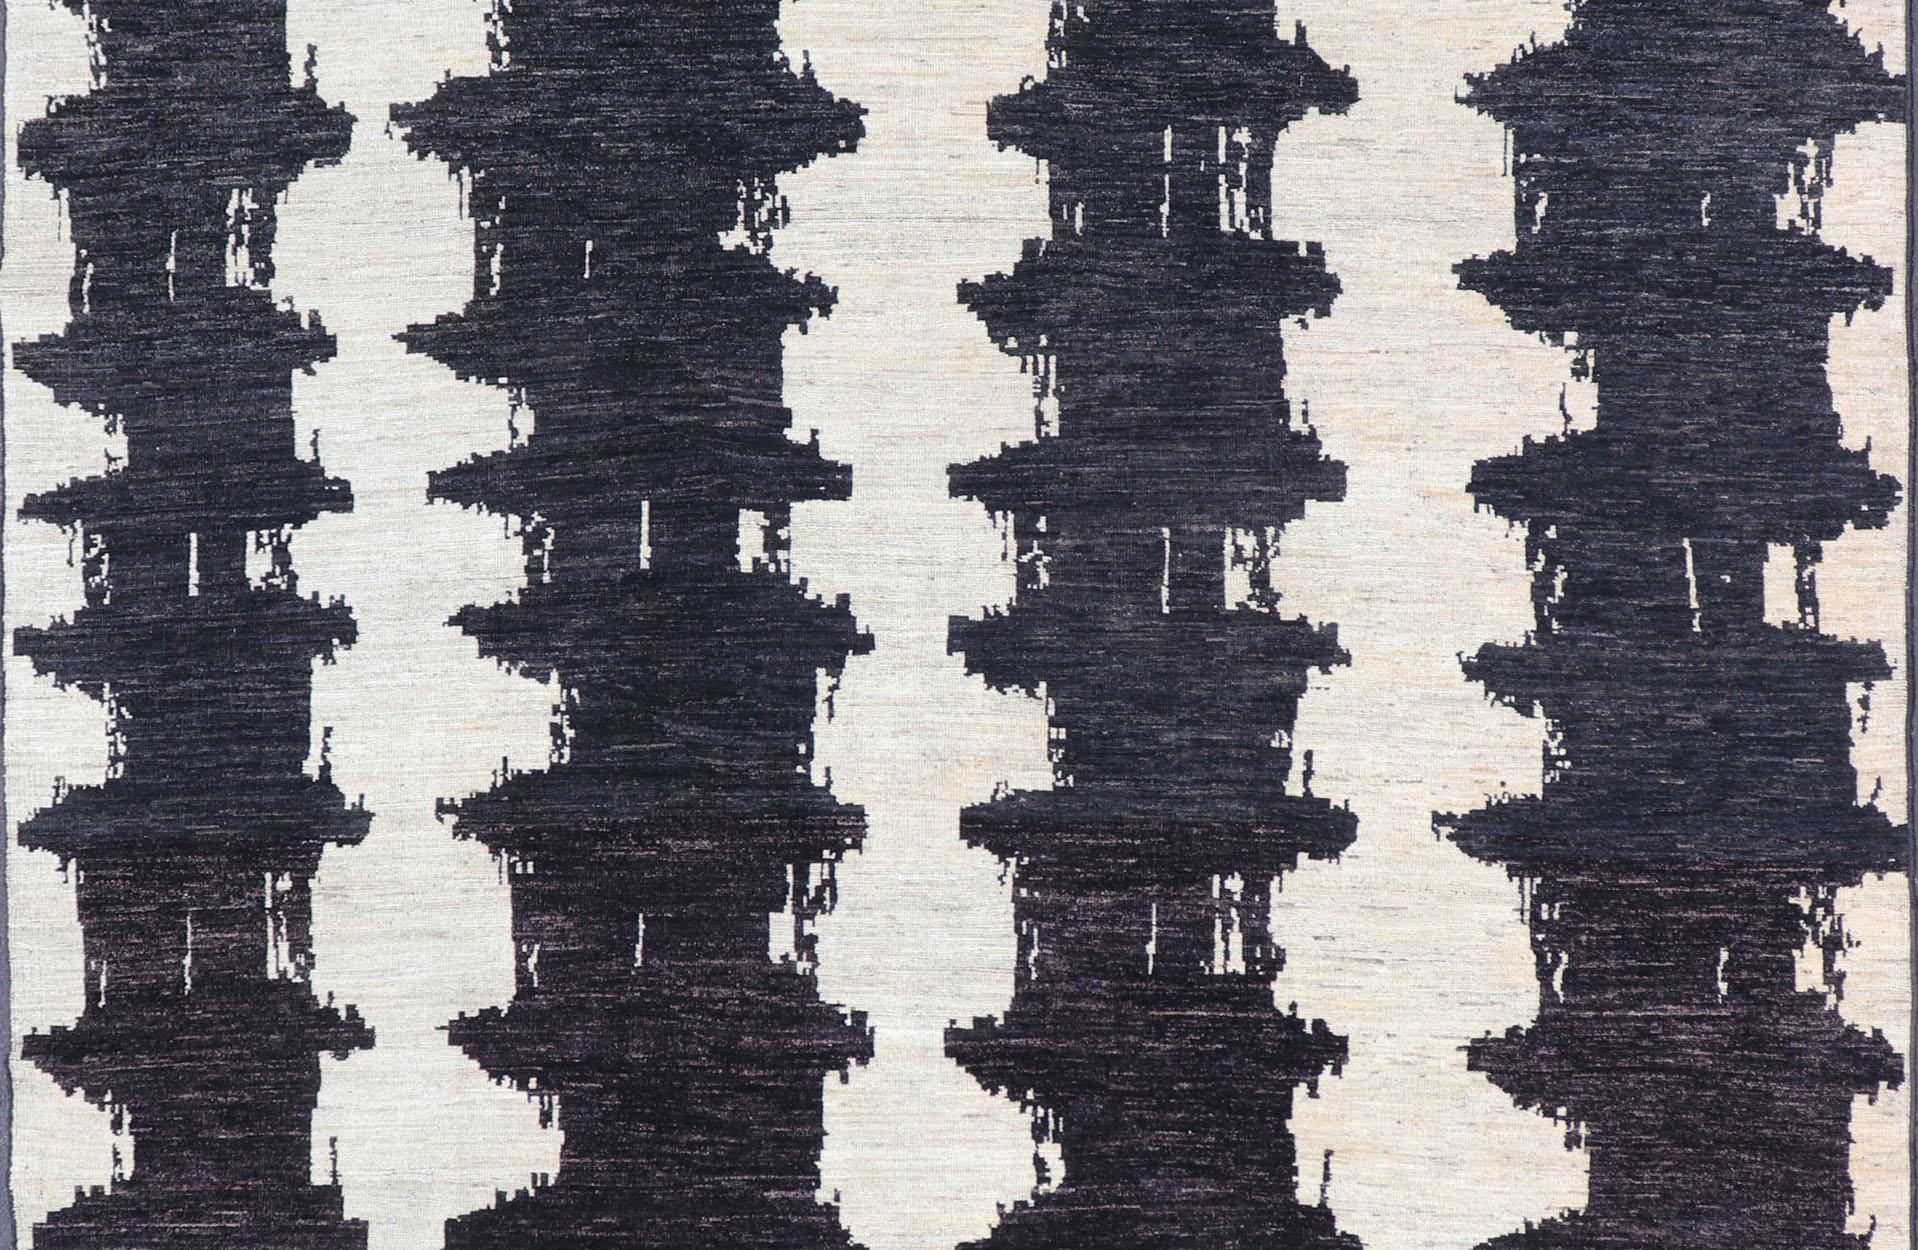 Measures 9'6 x 12'1 

This modern casual Afghan rug has a minimalistic design of vertical motifs paneled asymmetrically in black and white. This piece has been hand-knotted with a piled texture, giving the foundation durability.

Country of